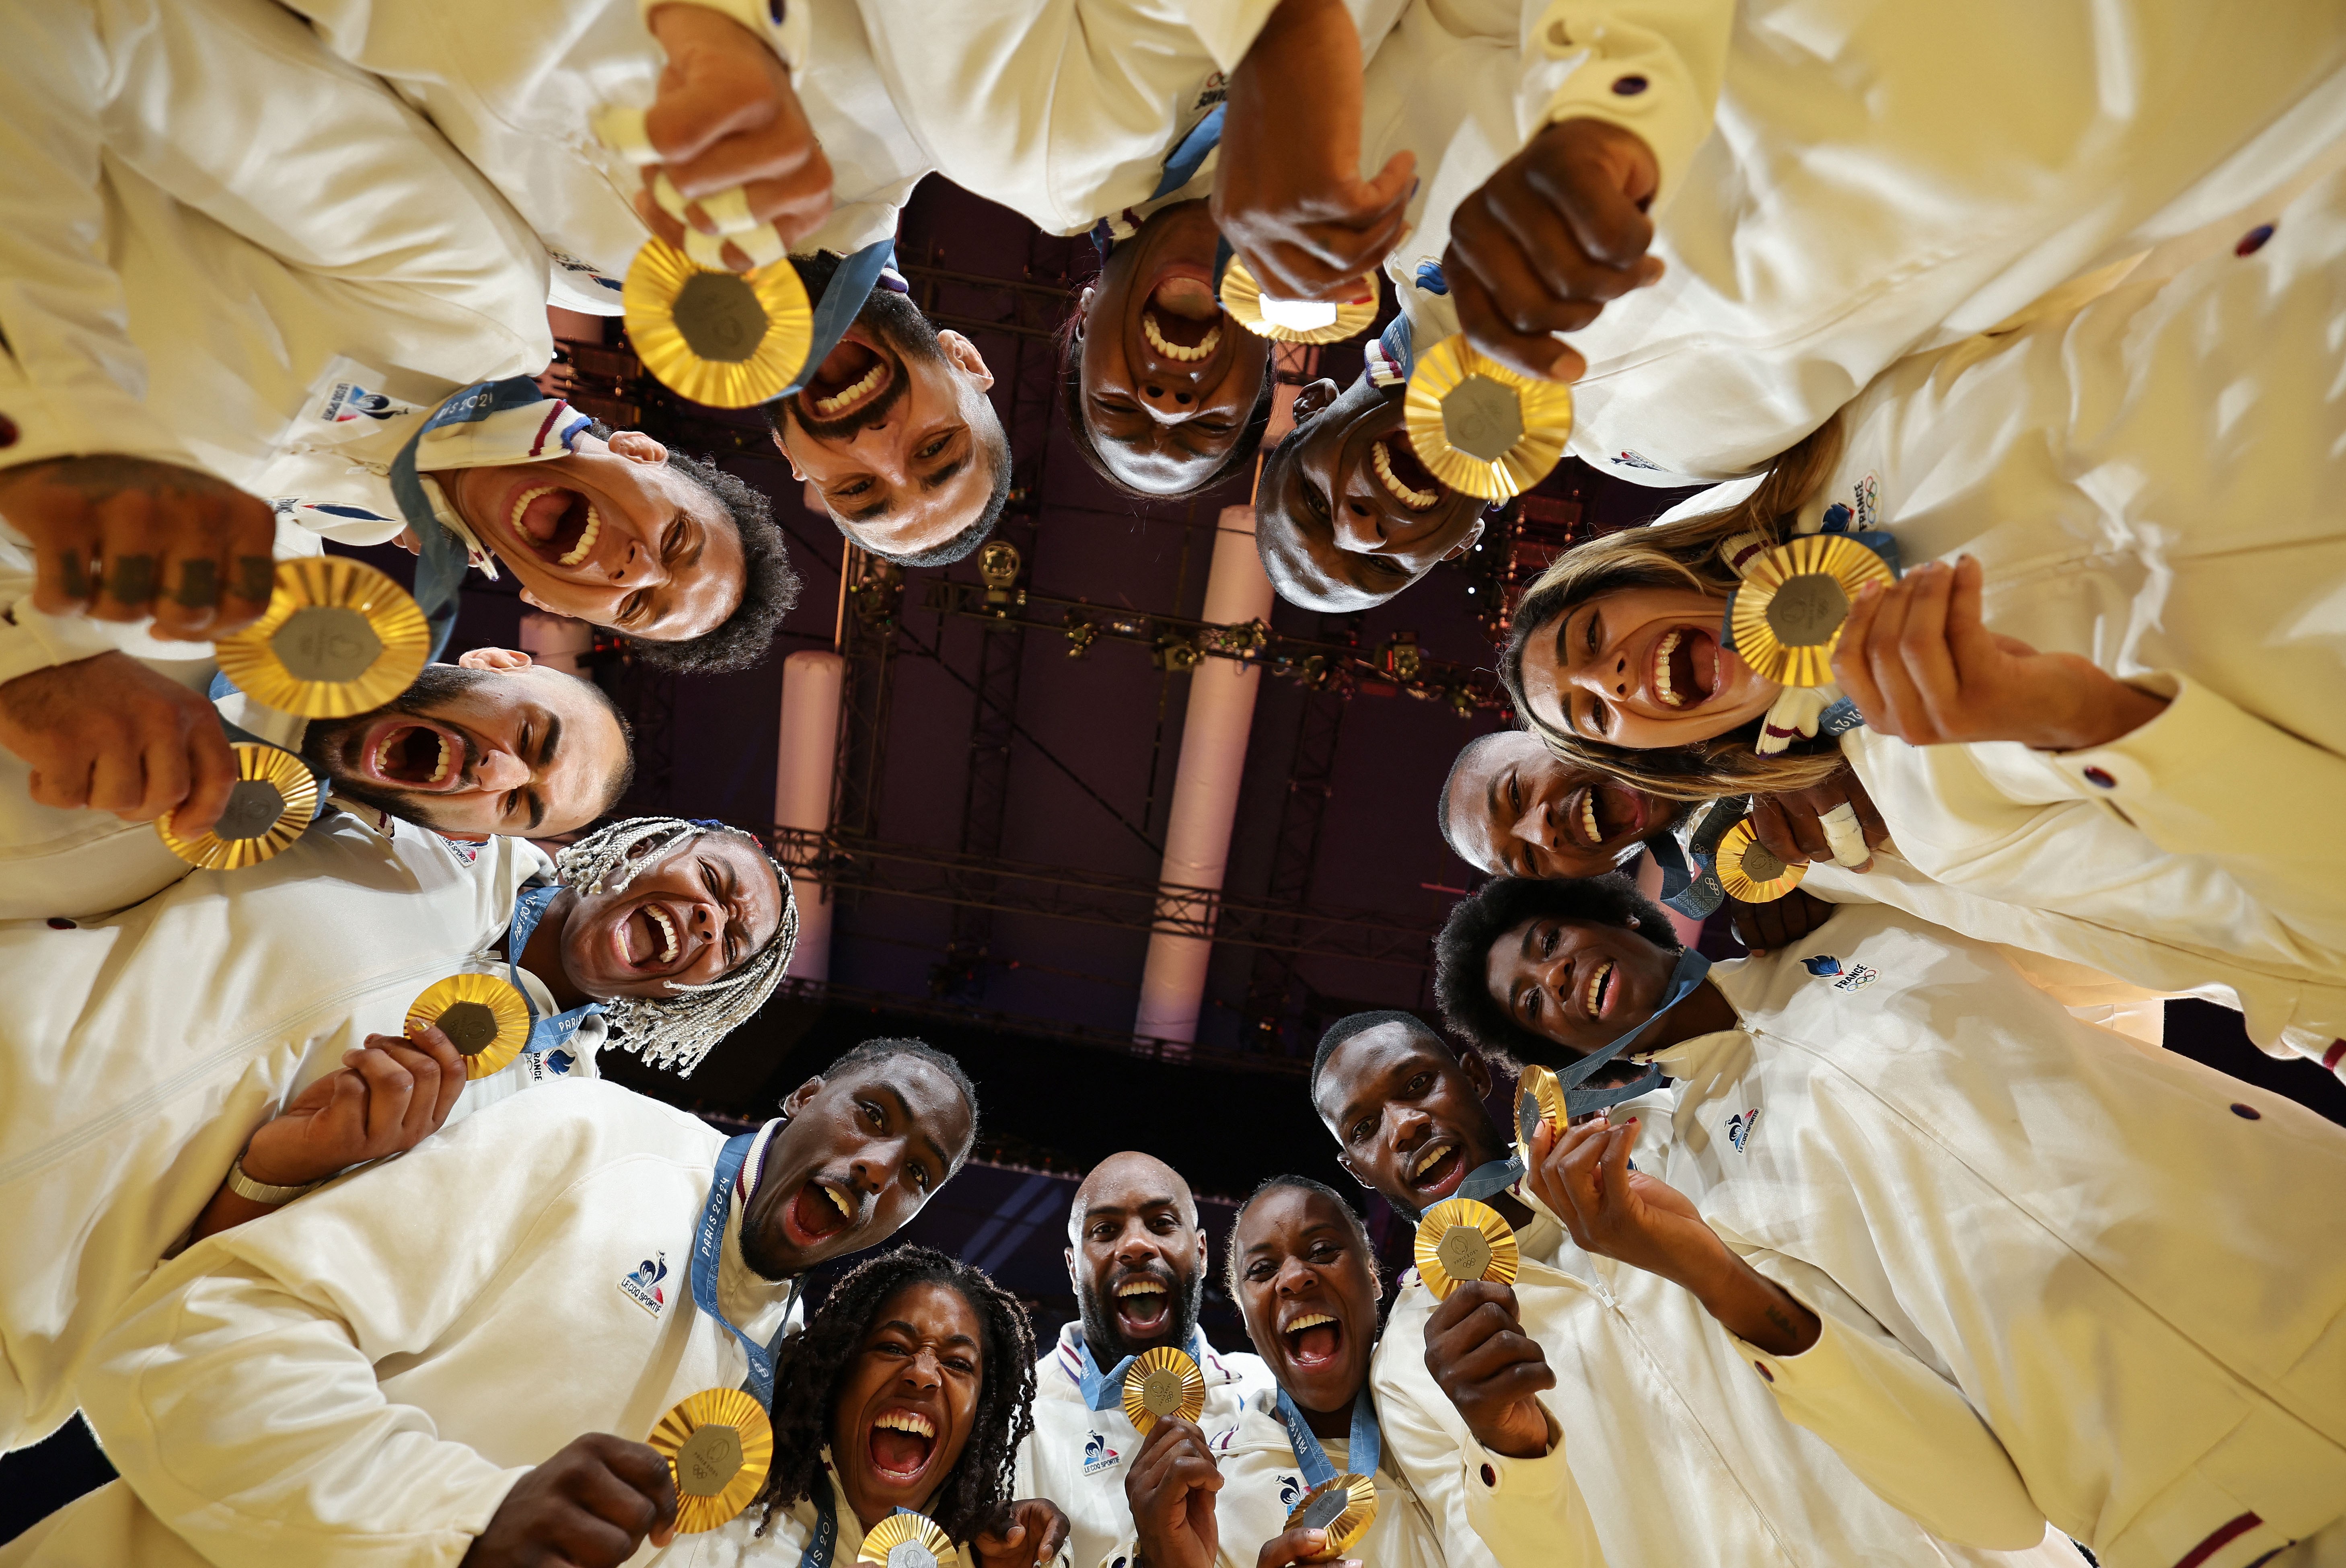 A view looking up at fourteen athletes, gathered in a circle, all holding gold medals, cheering and smiling down toward the camera.